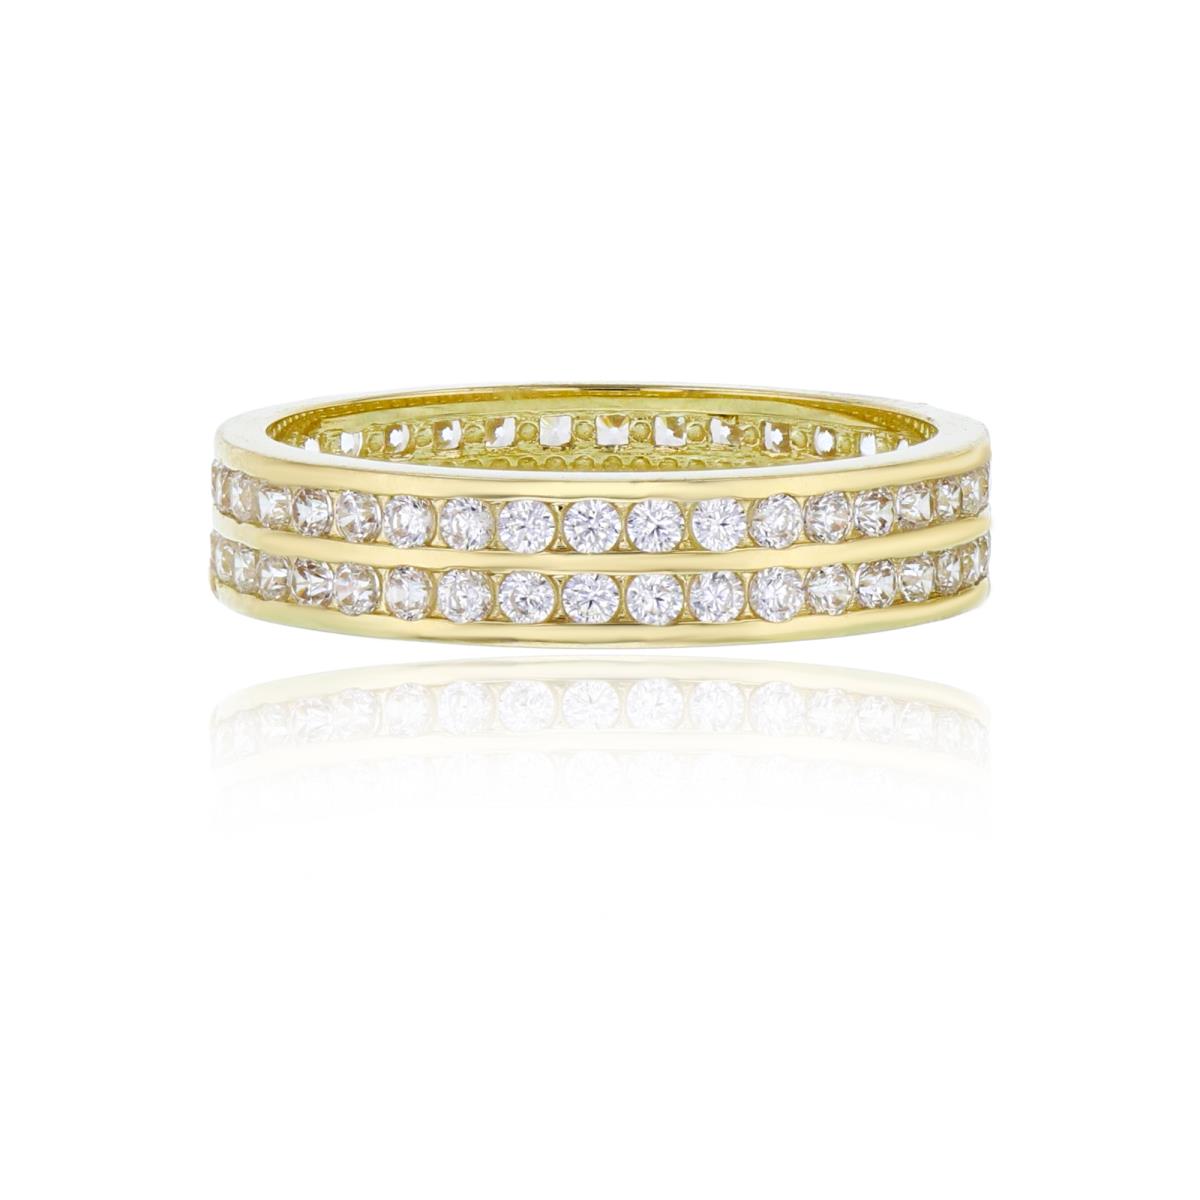 10K Yellow Gold 2-Row Pave Channel Set Eternity Ring